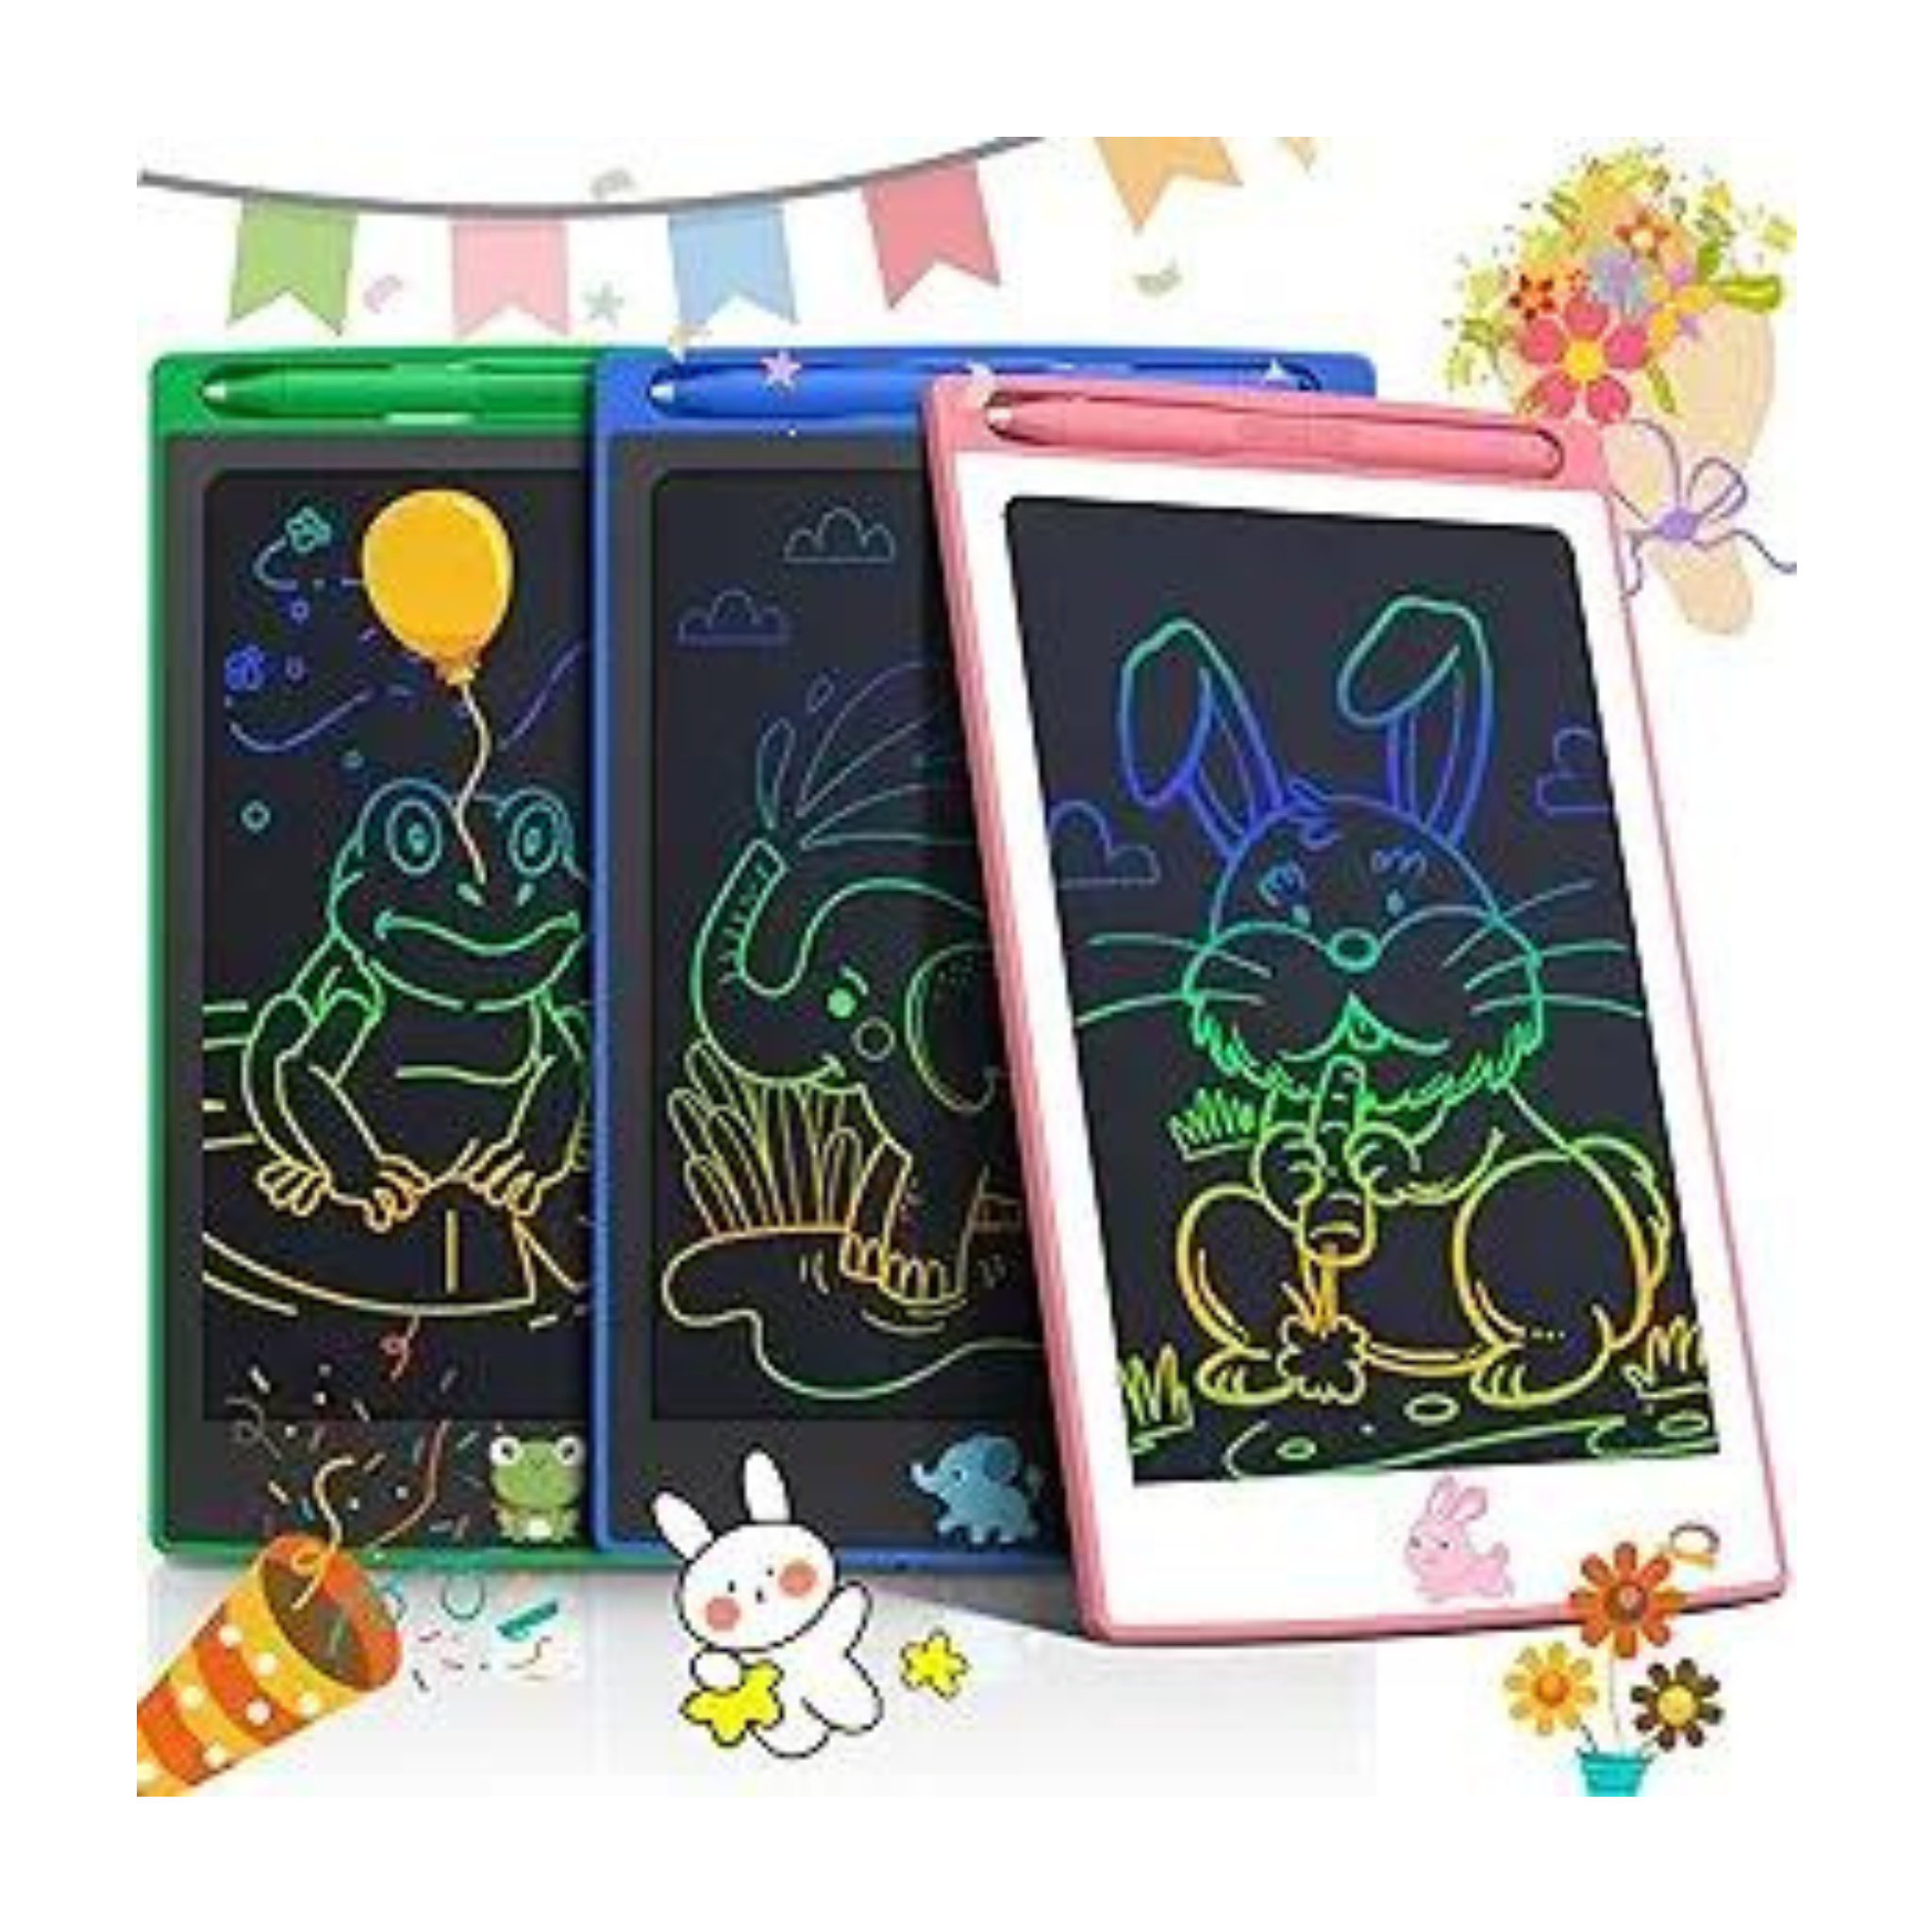 3 Pcs in 1 Pack LCD Writing Tablets